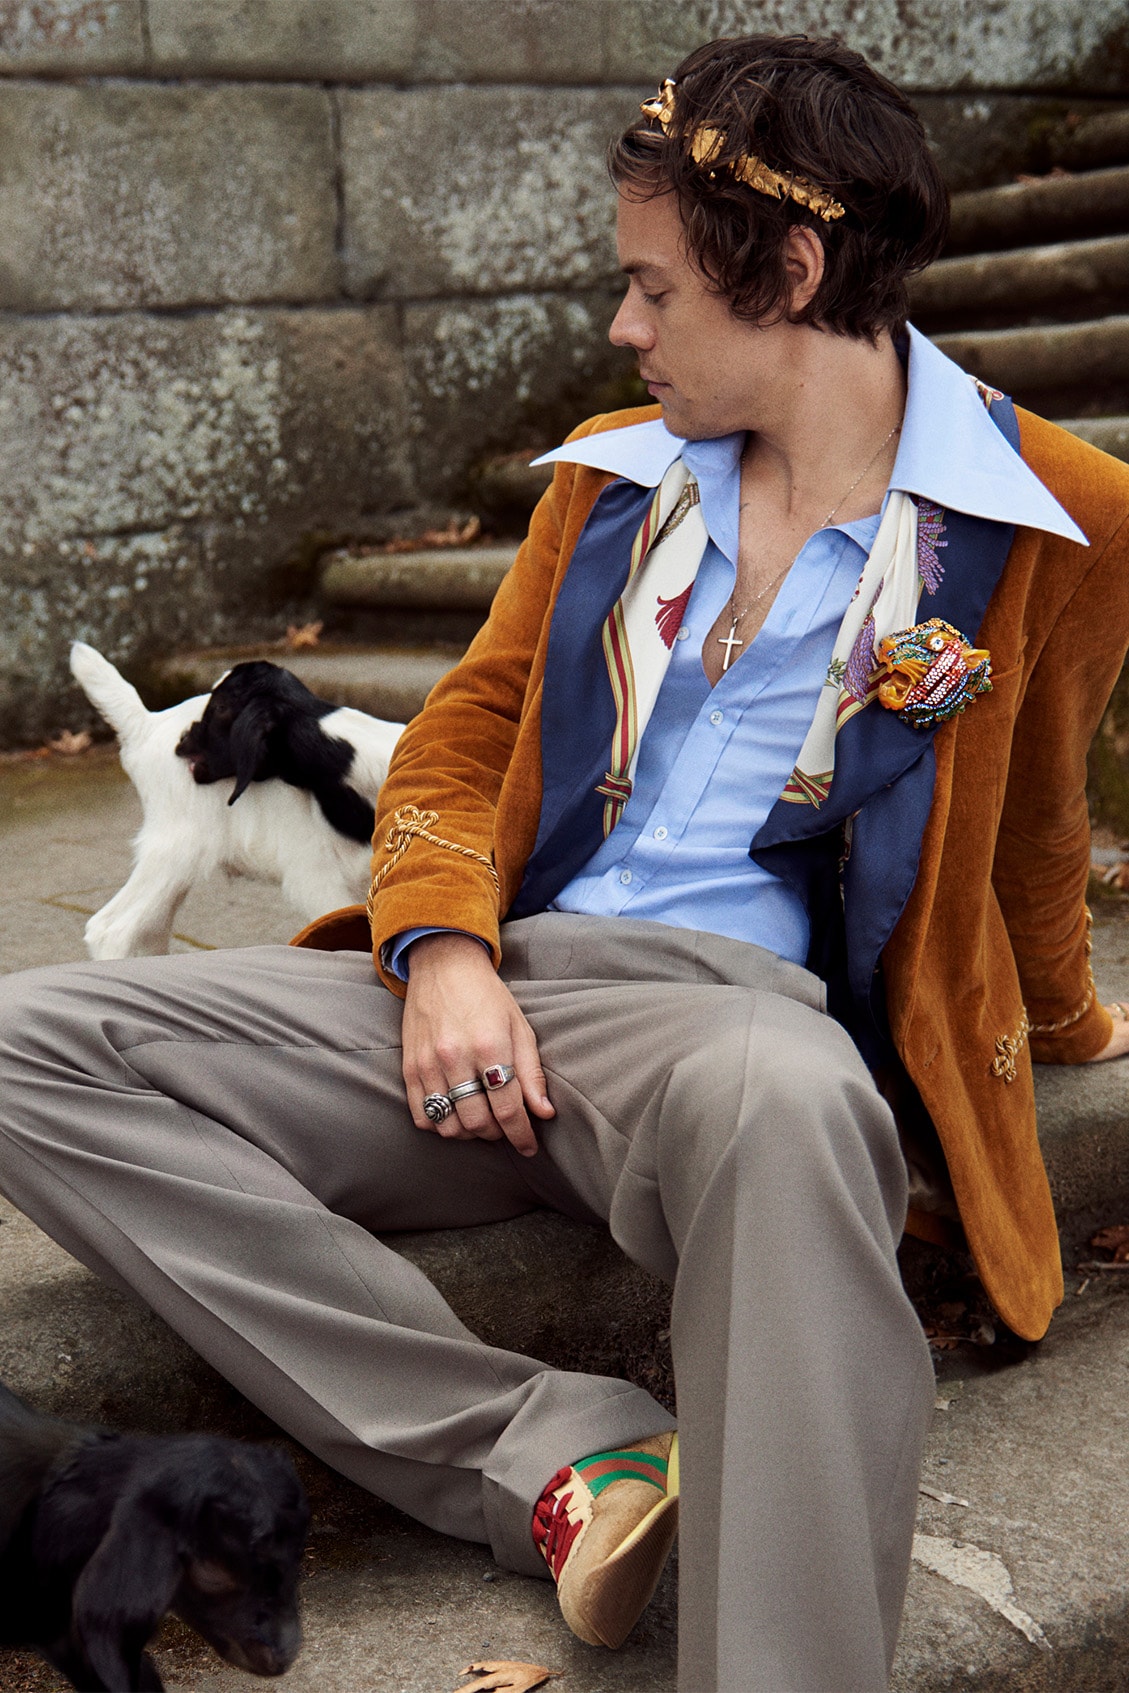 Gucci Cruise Harry Styles 2019 Mens Tailoring Campaign Fashion Clothing Garments High End Cop Purchase Buy Available Soon Glen Luchford Italy Villa Lante pig goat sheep